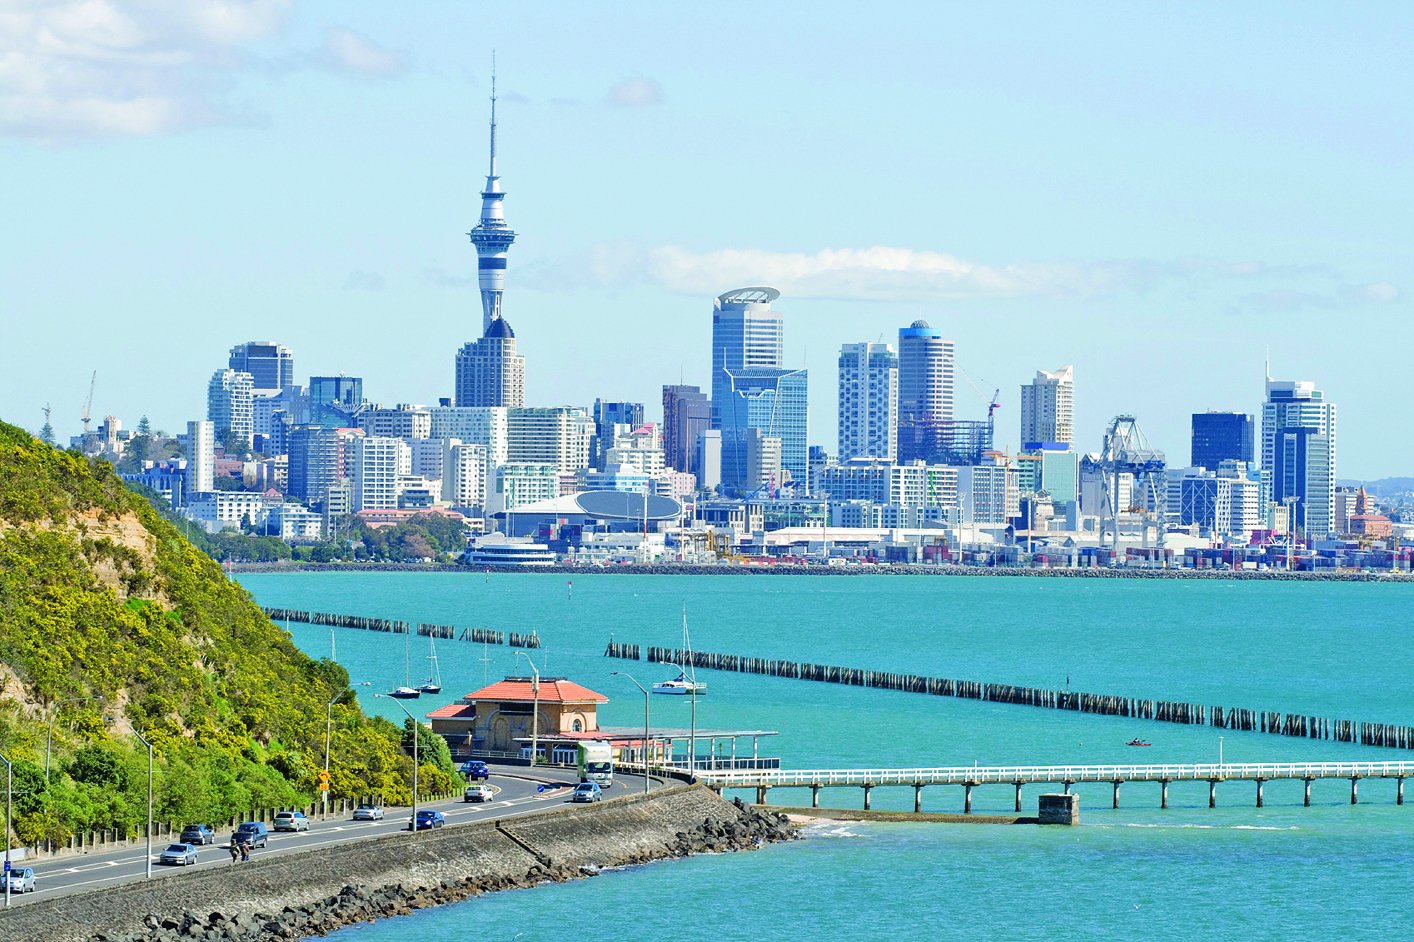 Auckland is beautiful